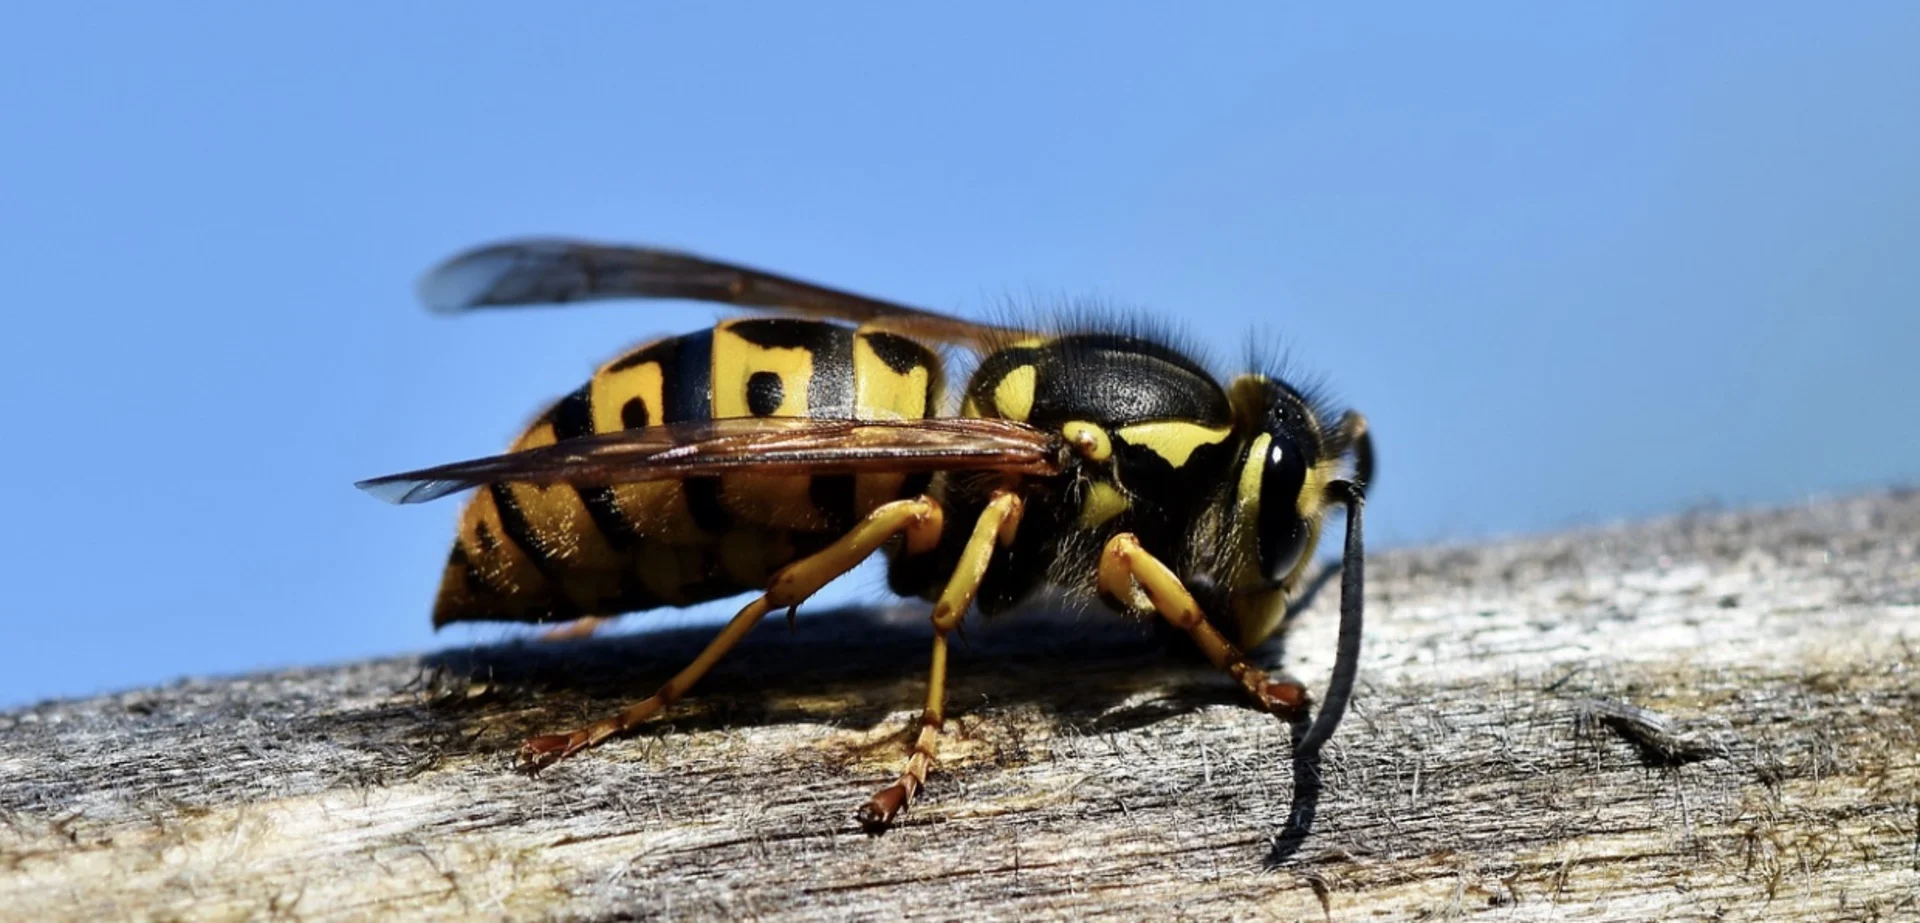 Wasps are aggressive right now; here's why and how to stay safe